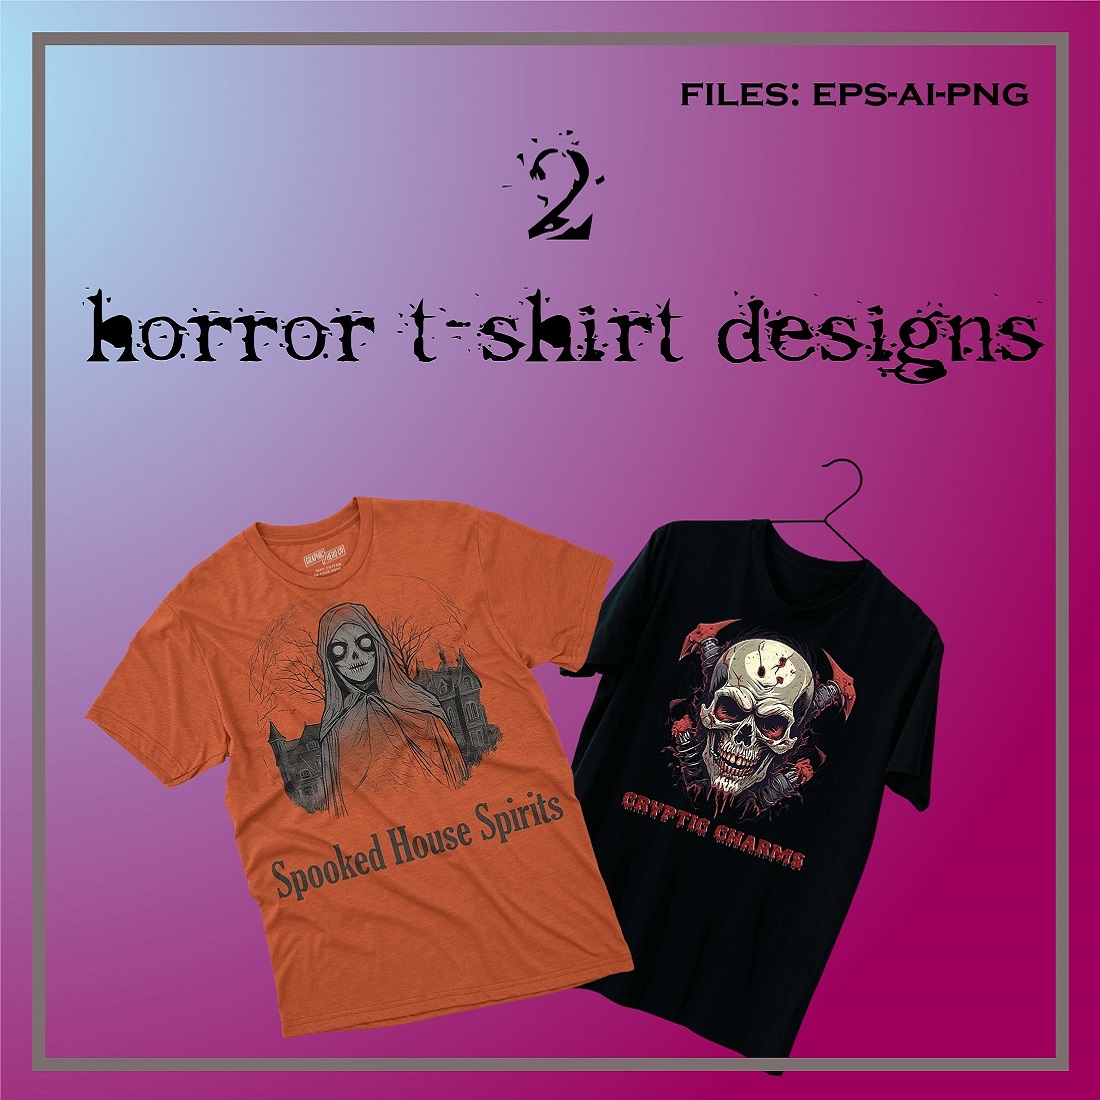 2 HORROR T-SHIRT DESIGNS cover image.